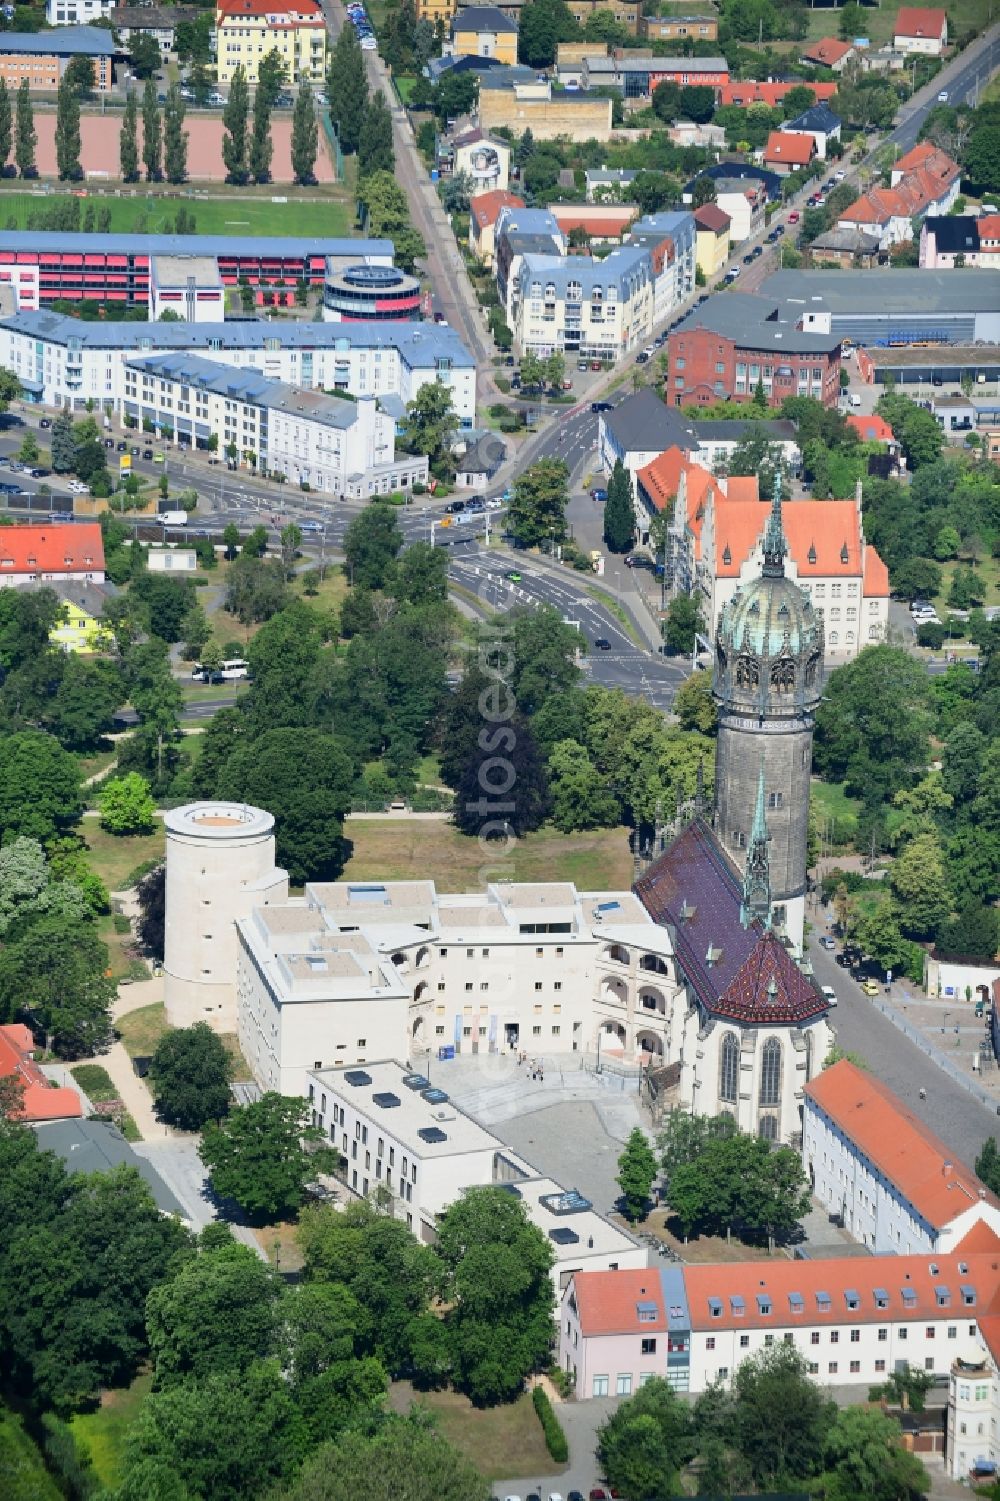 Aerial image Lutherstadt Wittenberg - Castle church of Wittenberg. The castle with its 88 m high Gothic tower at the west end of the town is a UNESCO World Heritage Site. It gained fame as the Wittenberg Augustinian monk and theology professor Martin Luther spread his disputation